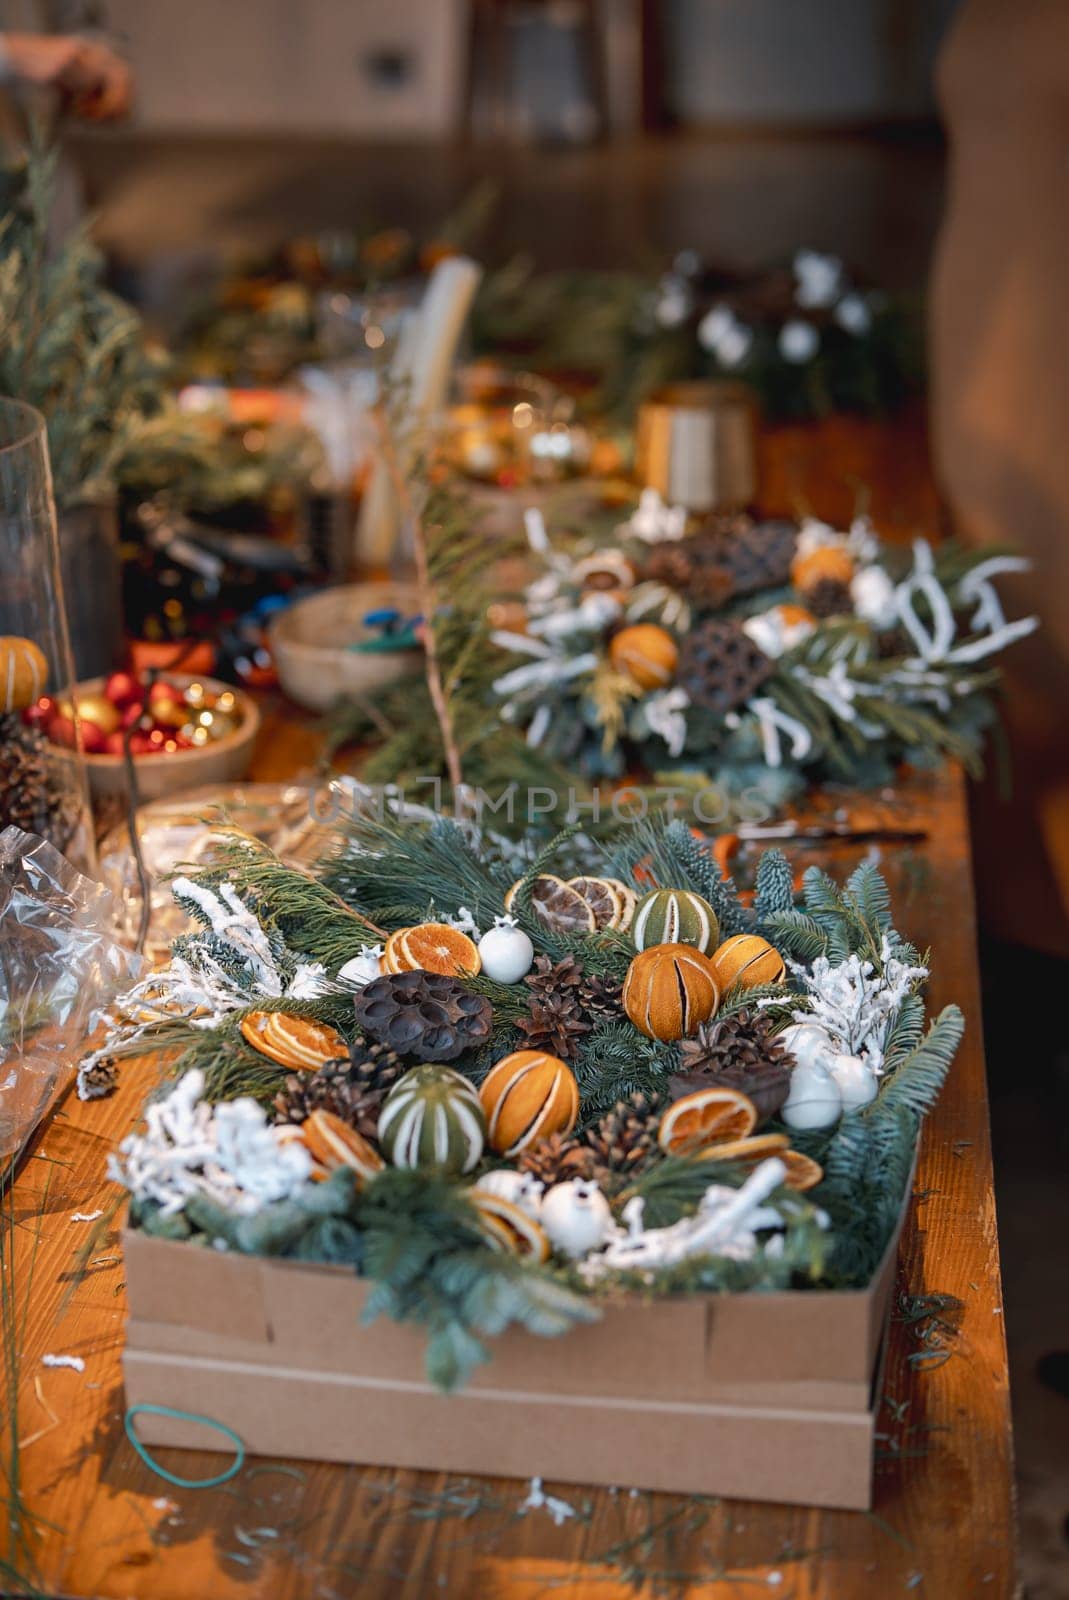 DIY session for creating Christmas wreaths and New Year's ornaments. High quality photo